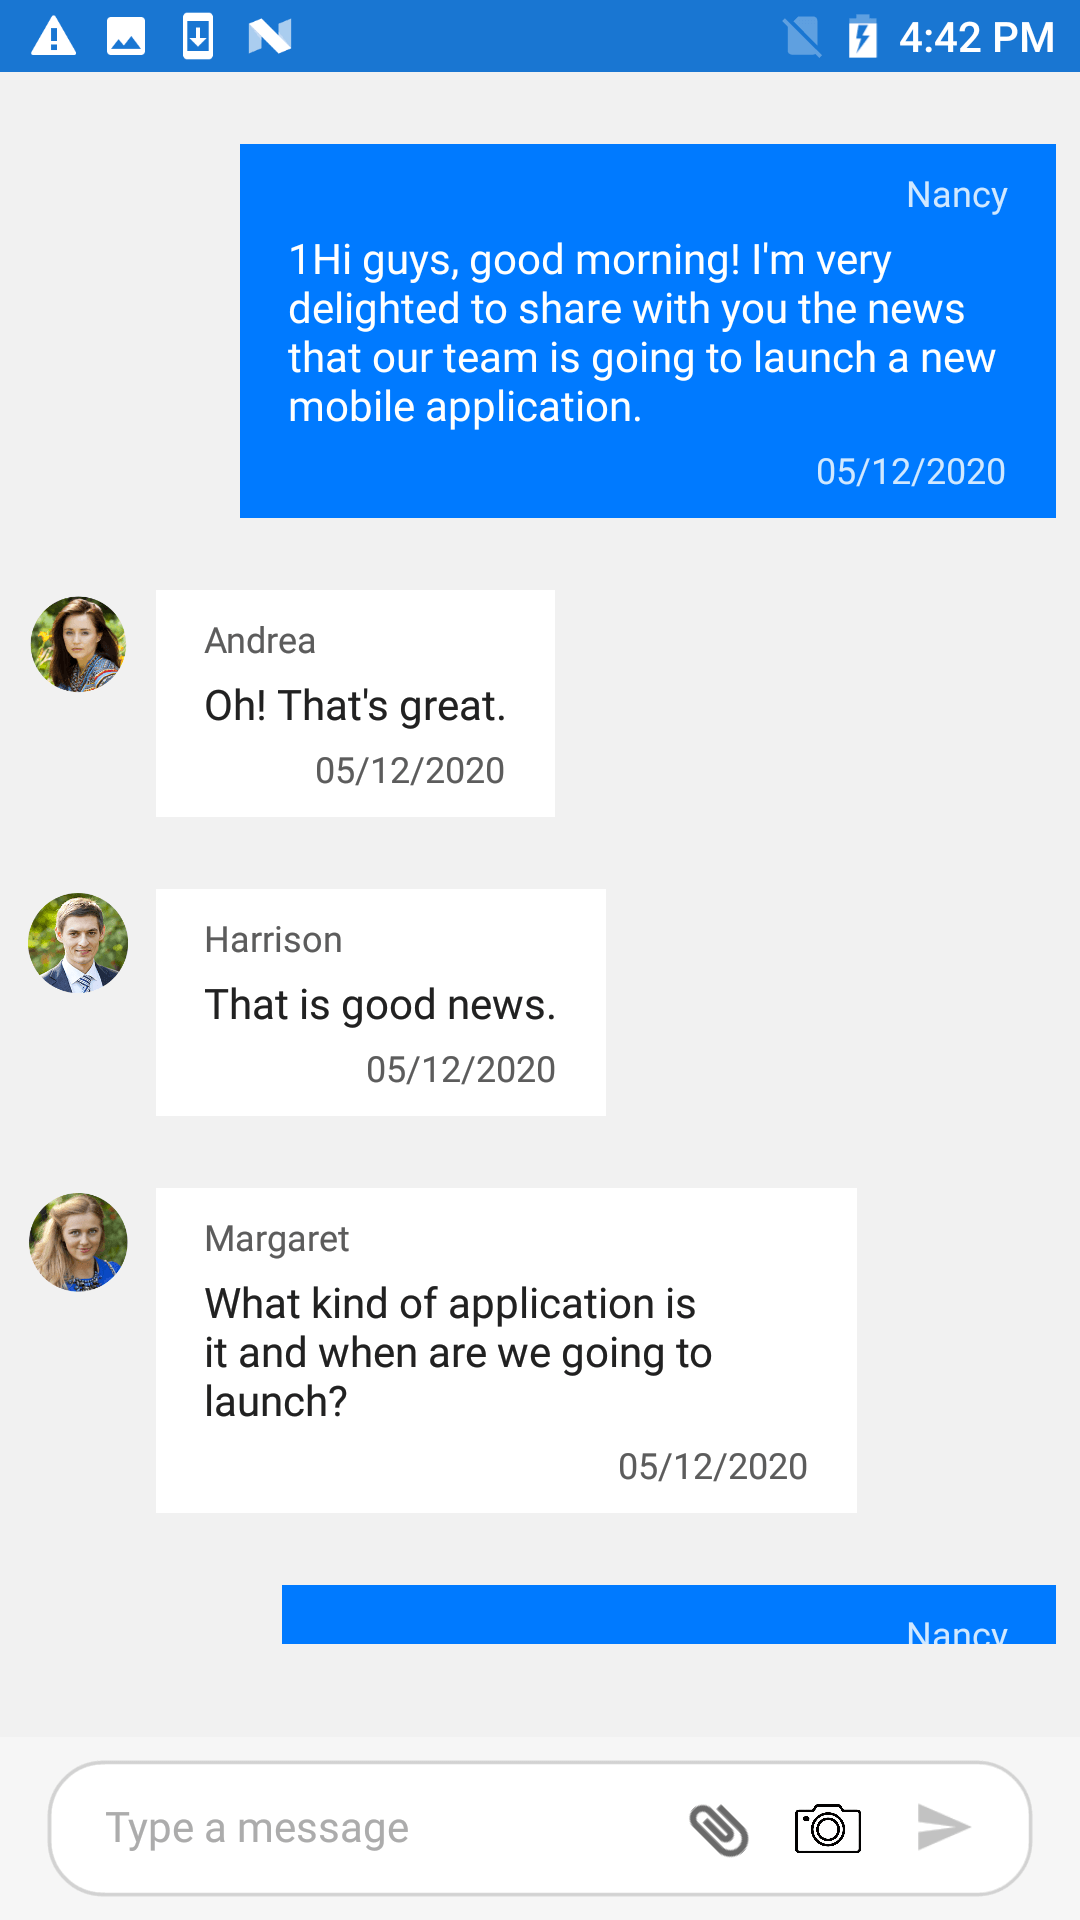 Custom attachment button in xamarin forms chat